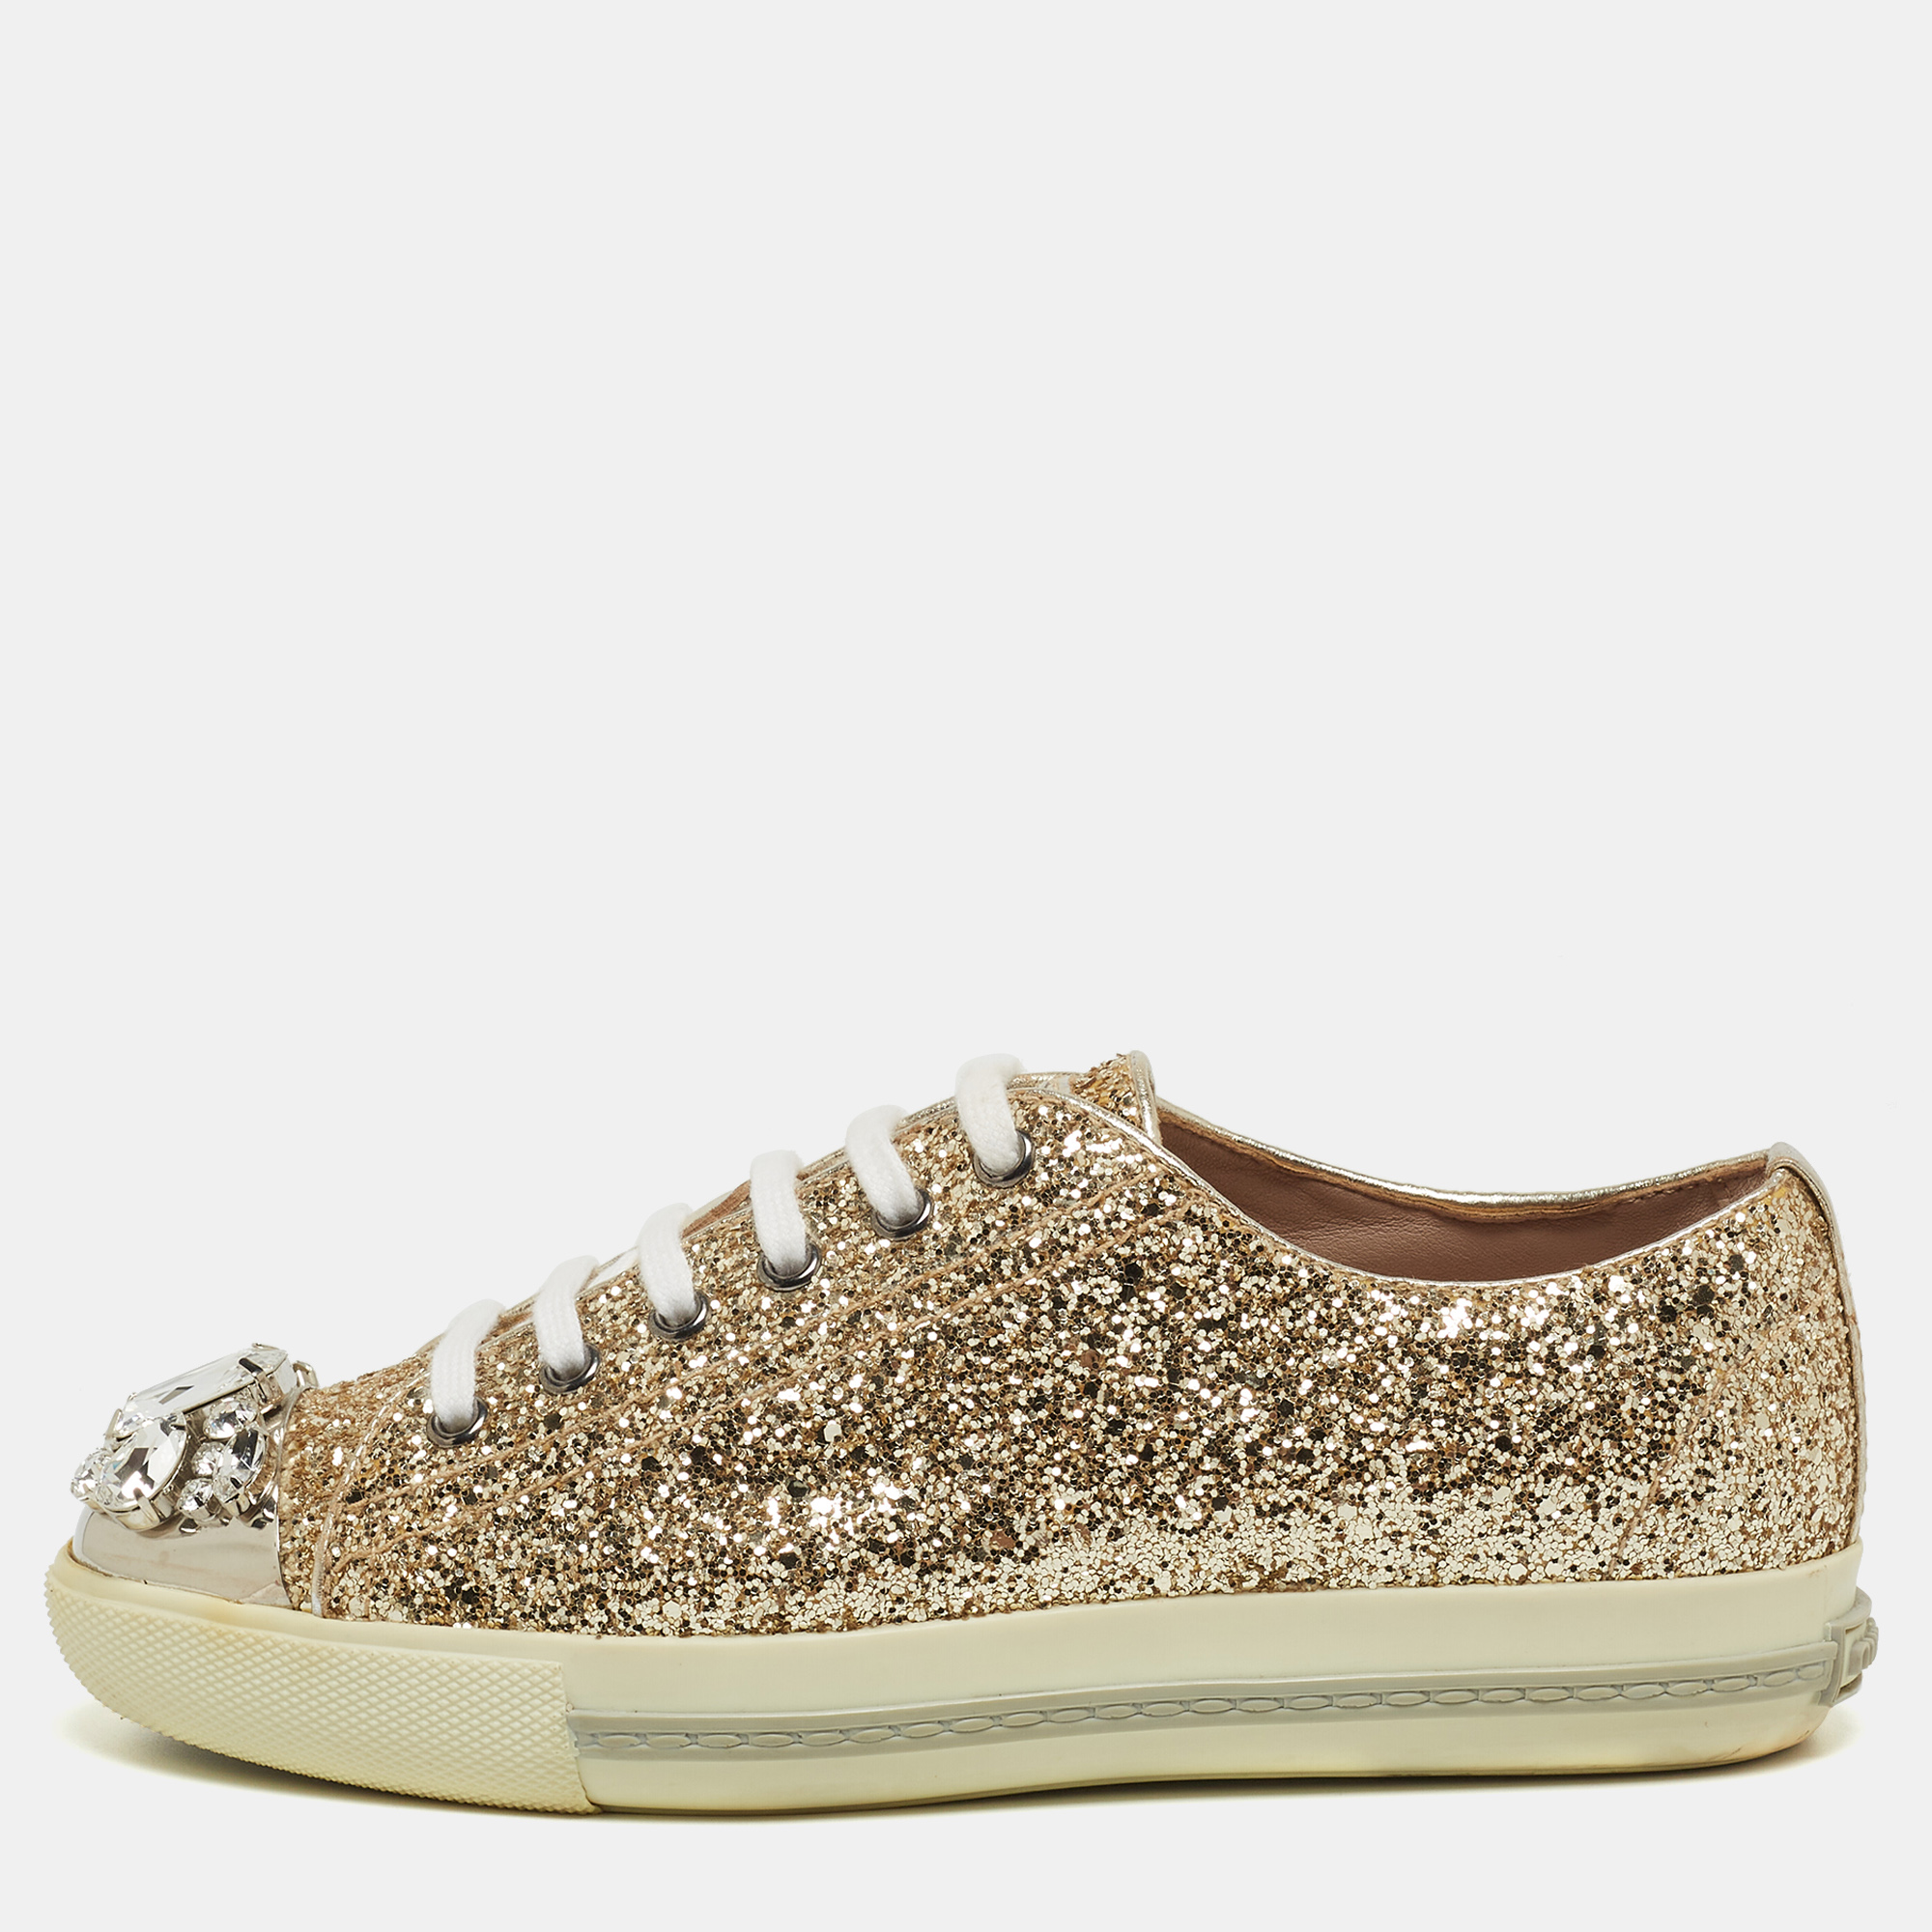 A signature Miu Miu style these low top sneakers for women are crafted in glitter and detailed with crystals on the cap toes. They are secured with lace ups and set on durable rubber soles.